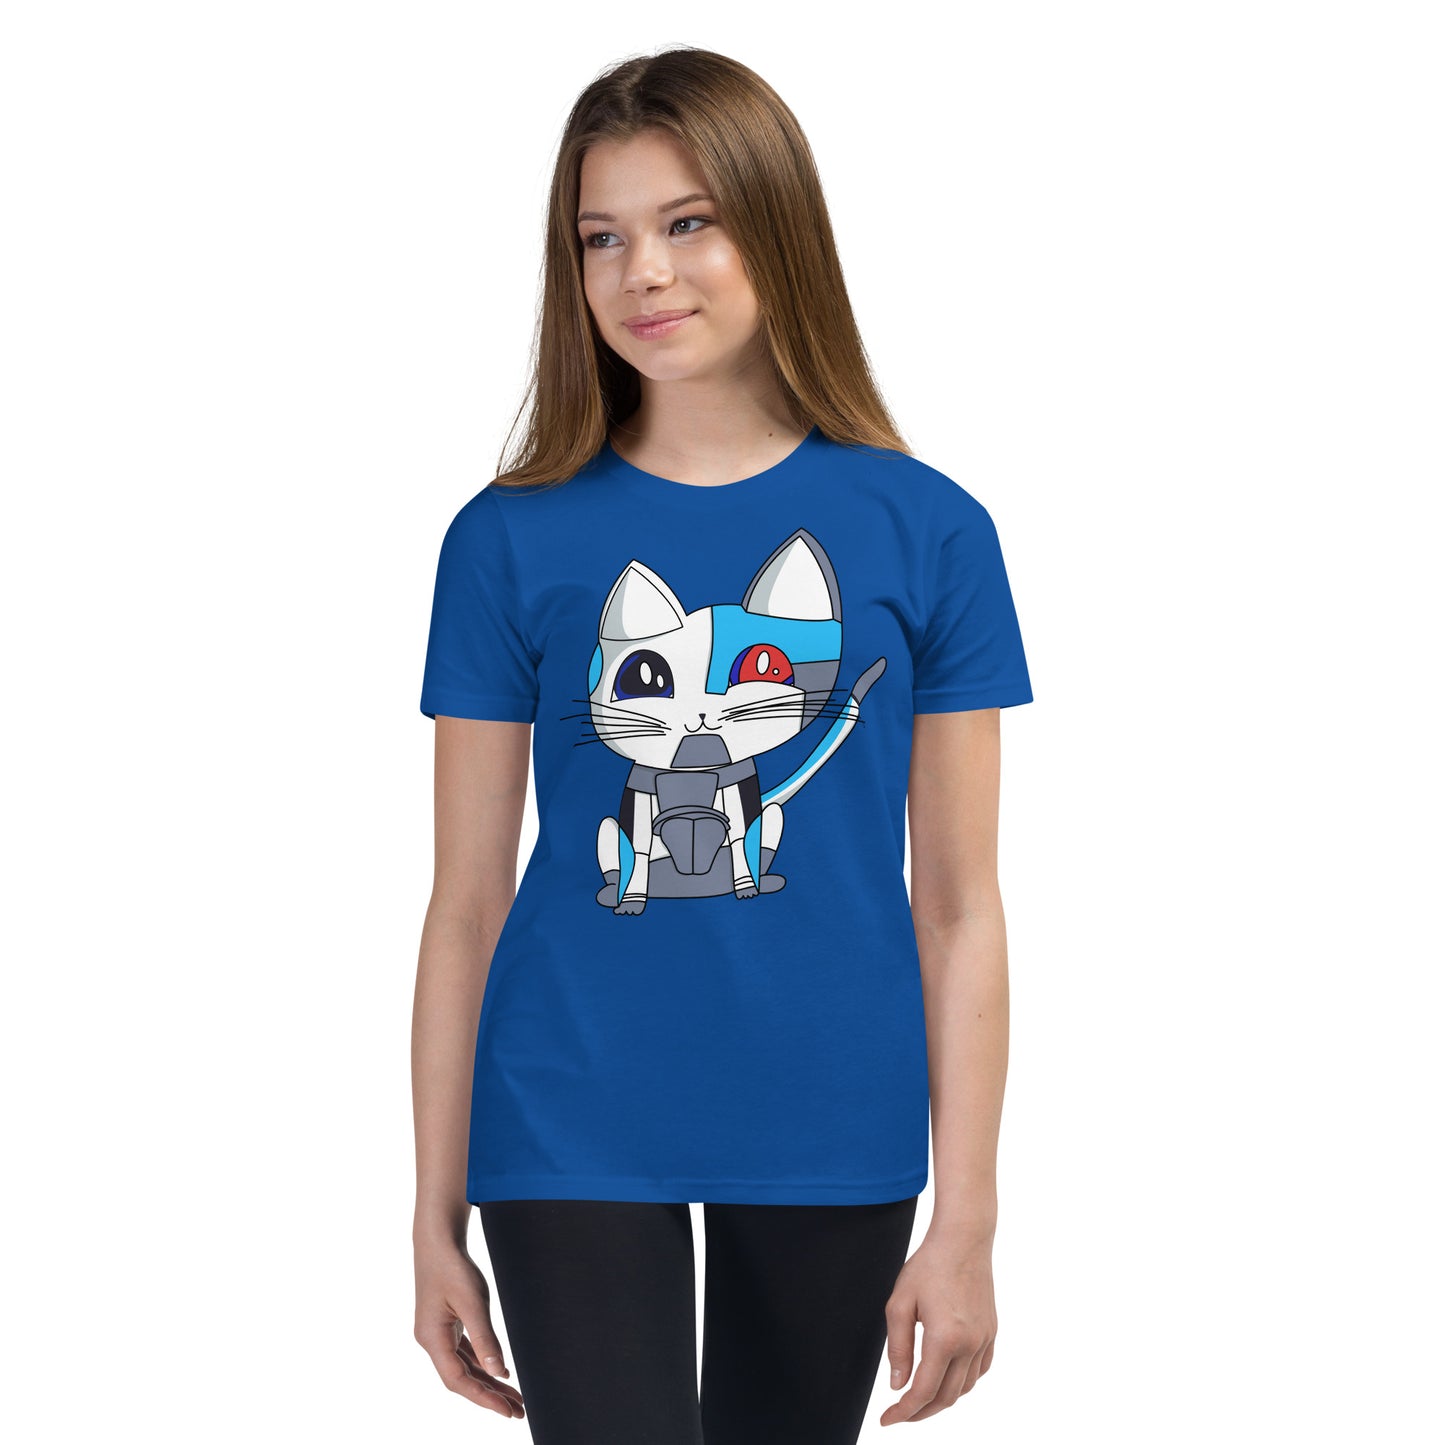 Cyber Cat - Ami's Cats Youth Short Sleeve T-Shirt